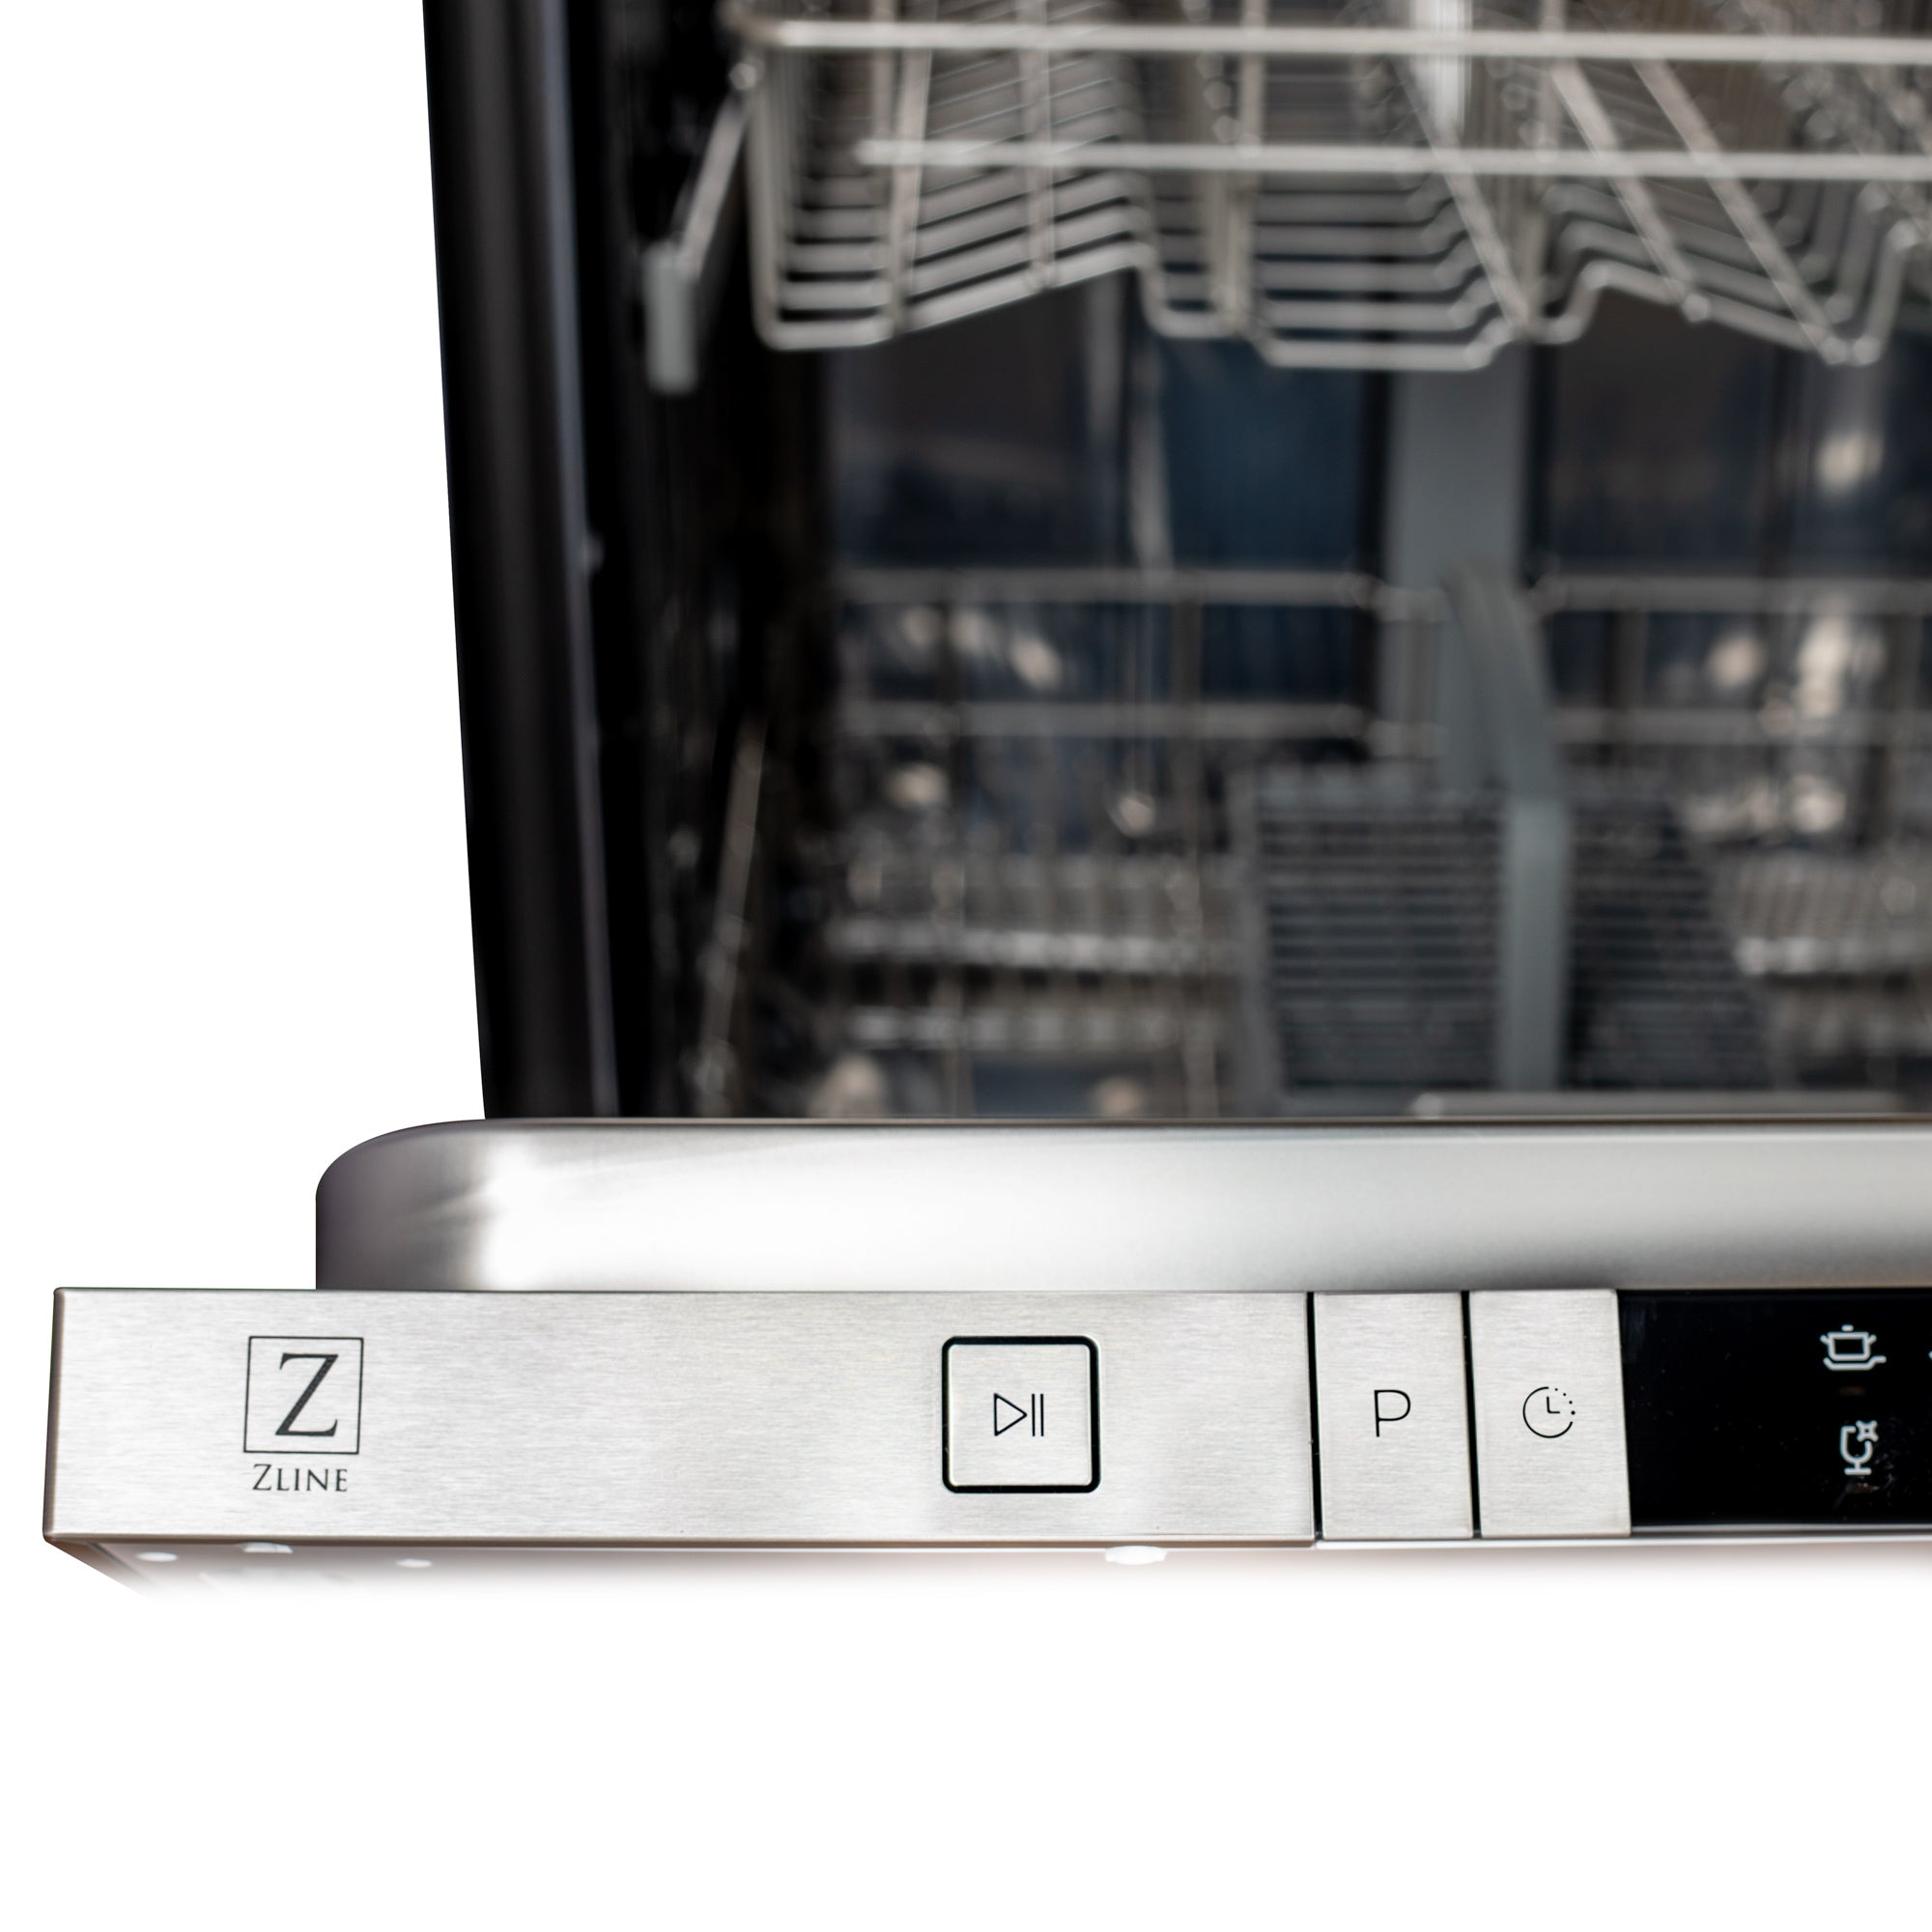 ZLINE 24 in. Black Matte Top Control Dishwasher with Stainless Steel Tub and Modern Style Handle, 52dBa (DW-BLM-H-24)